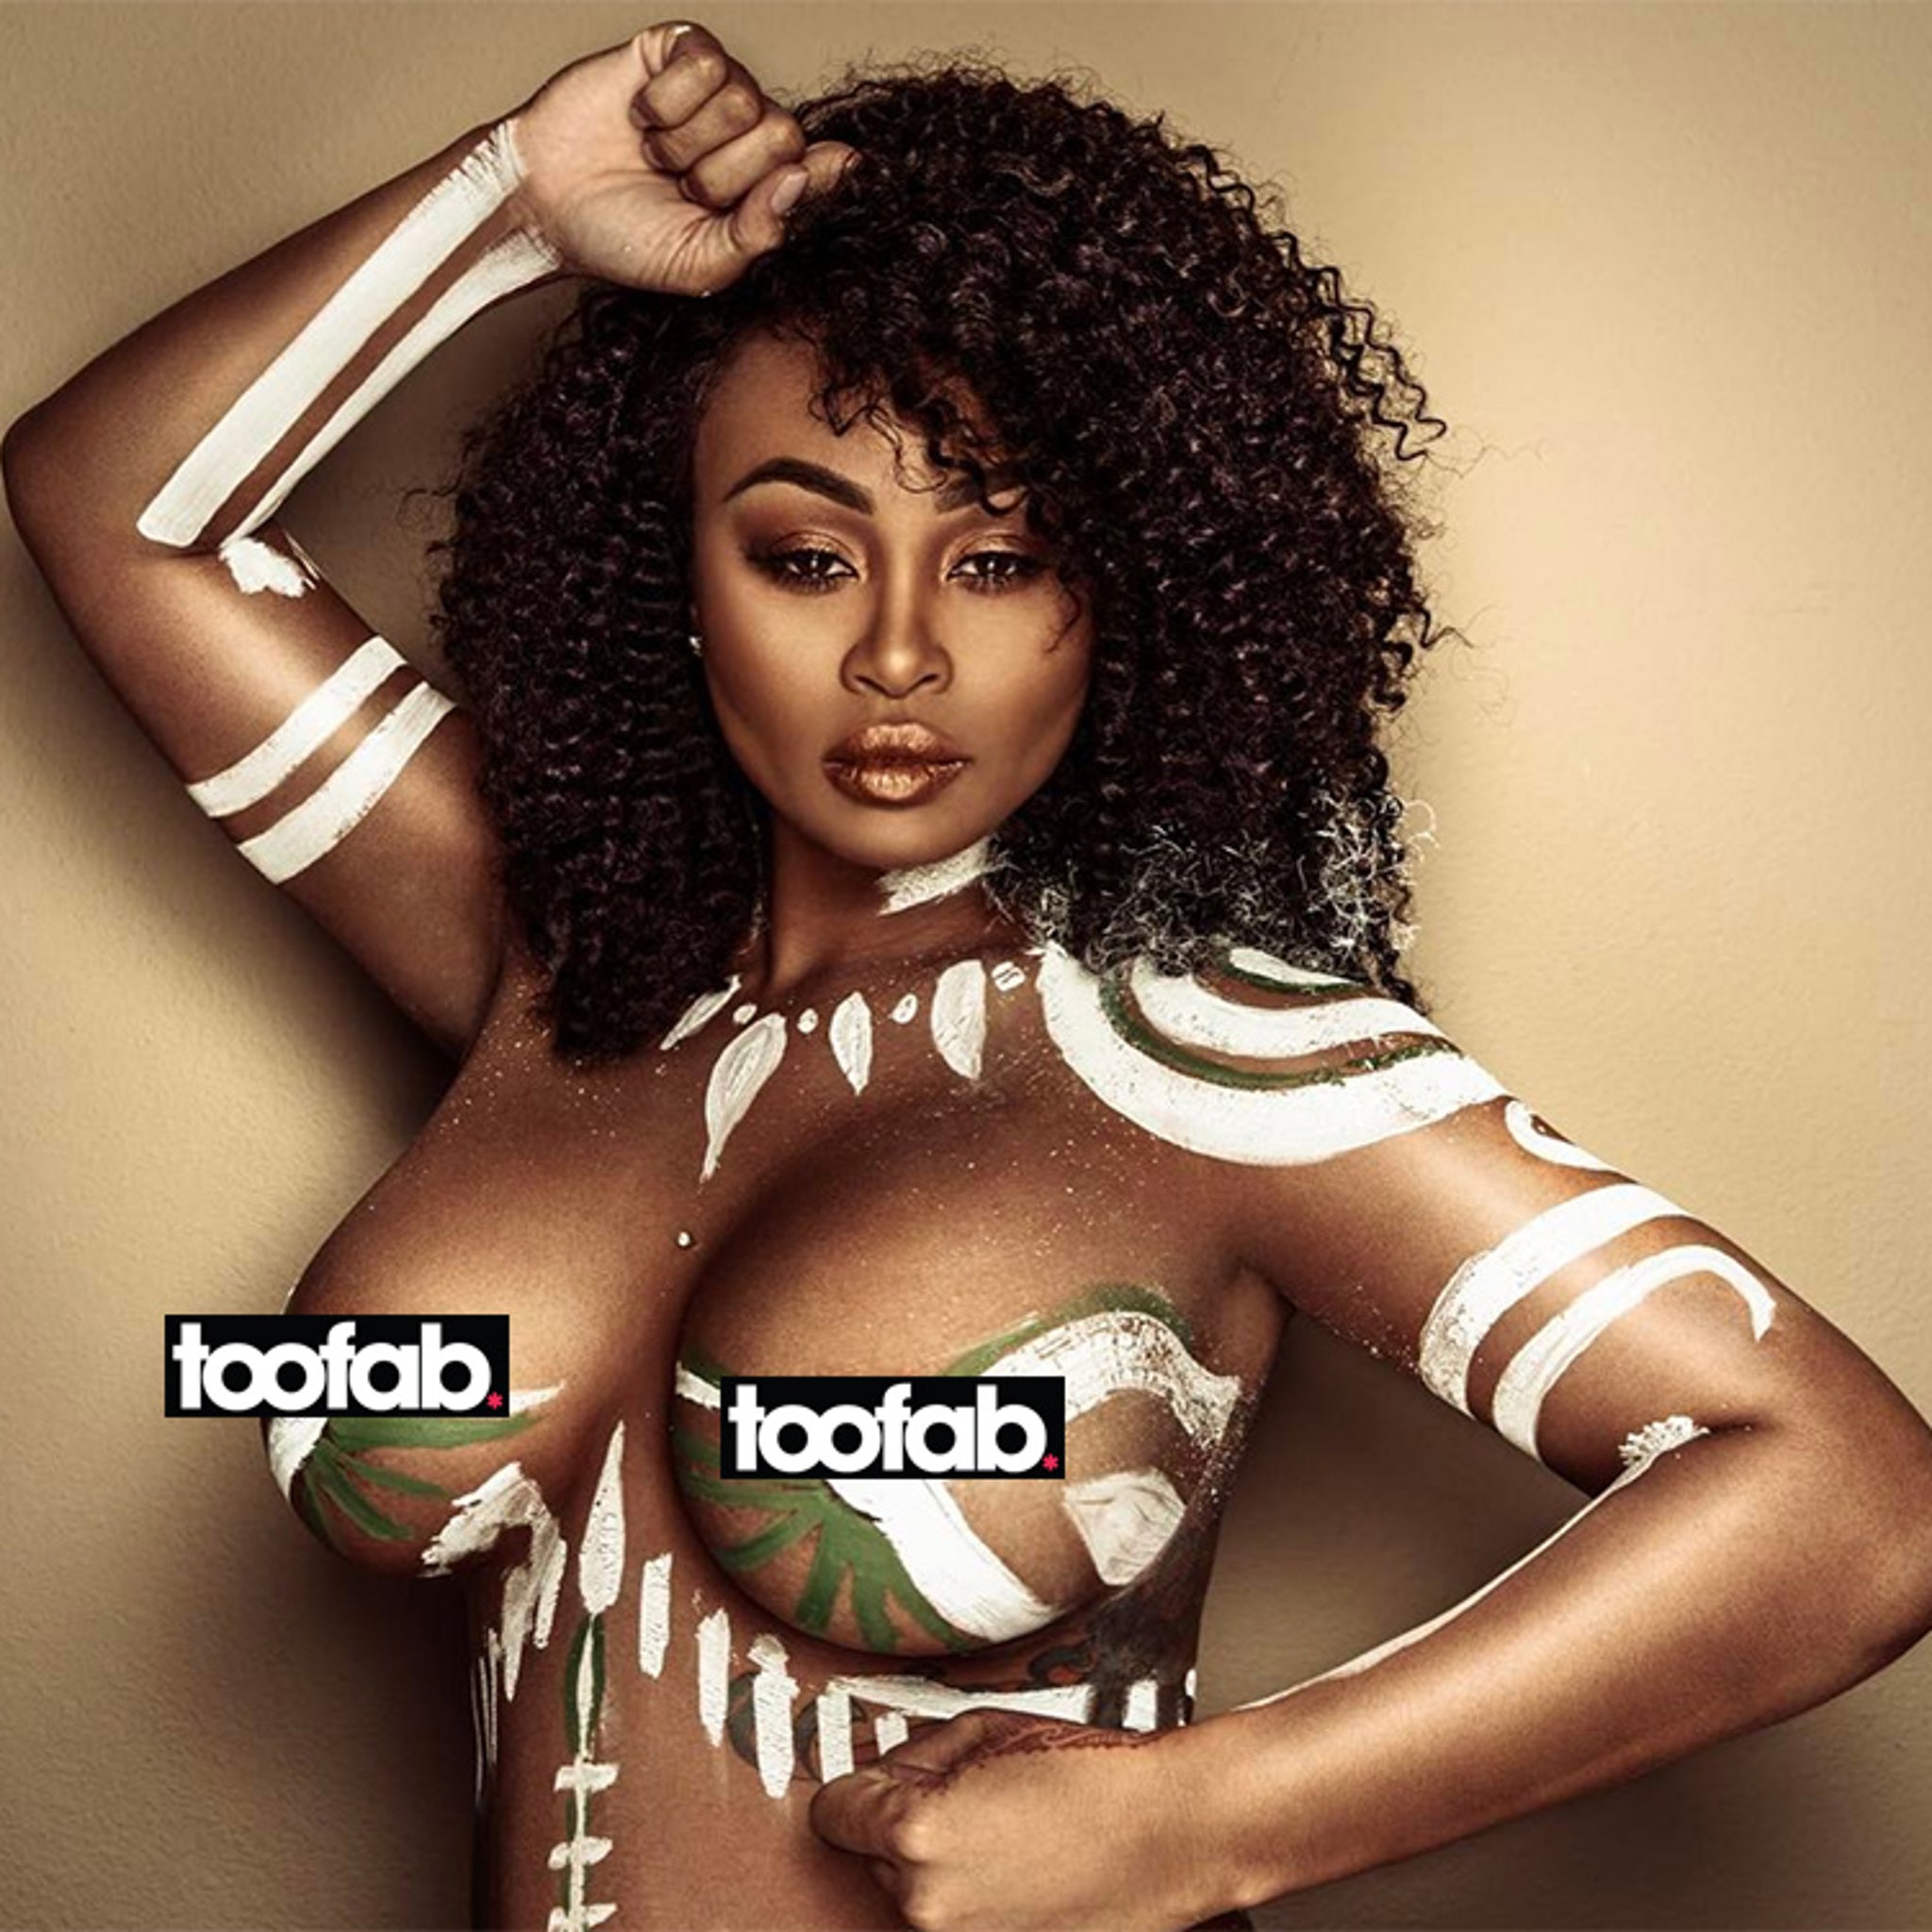 devan simpson recommends blac chyna naked picture pic